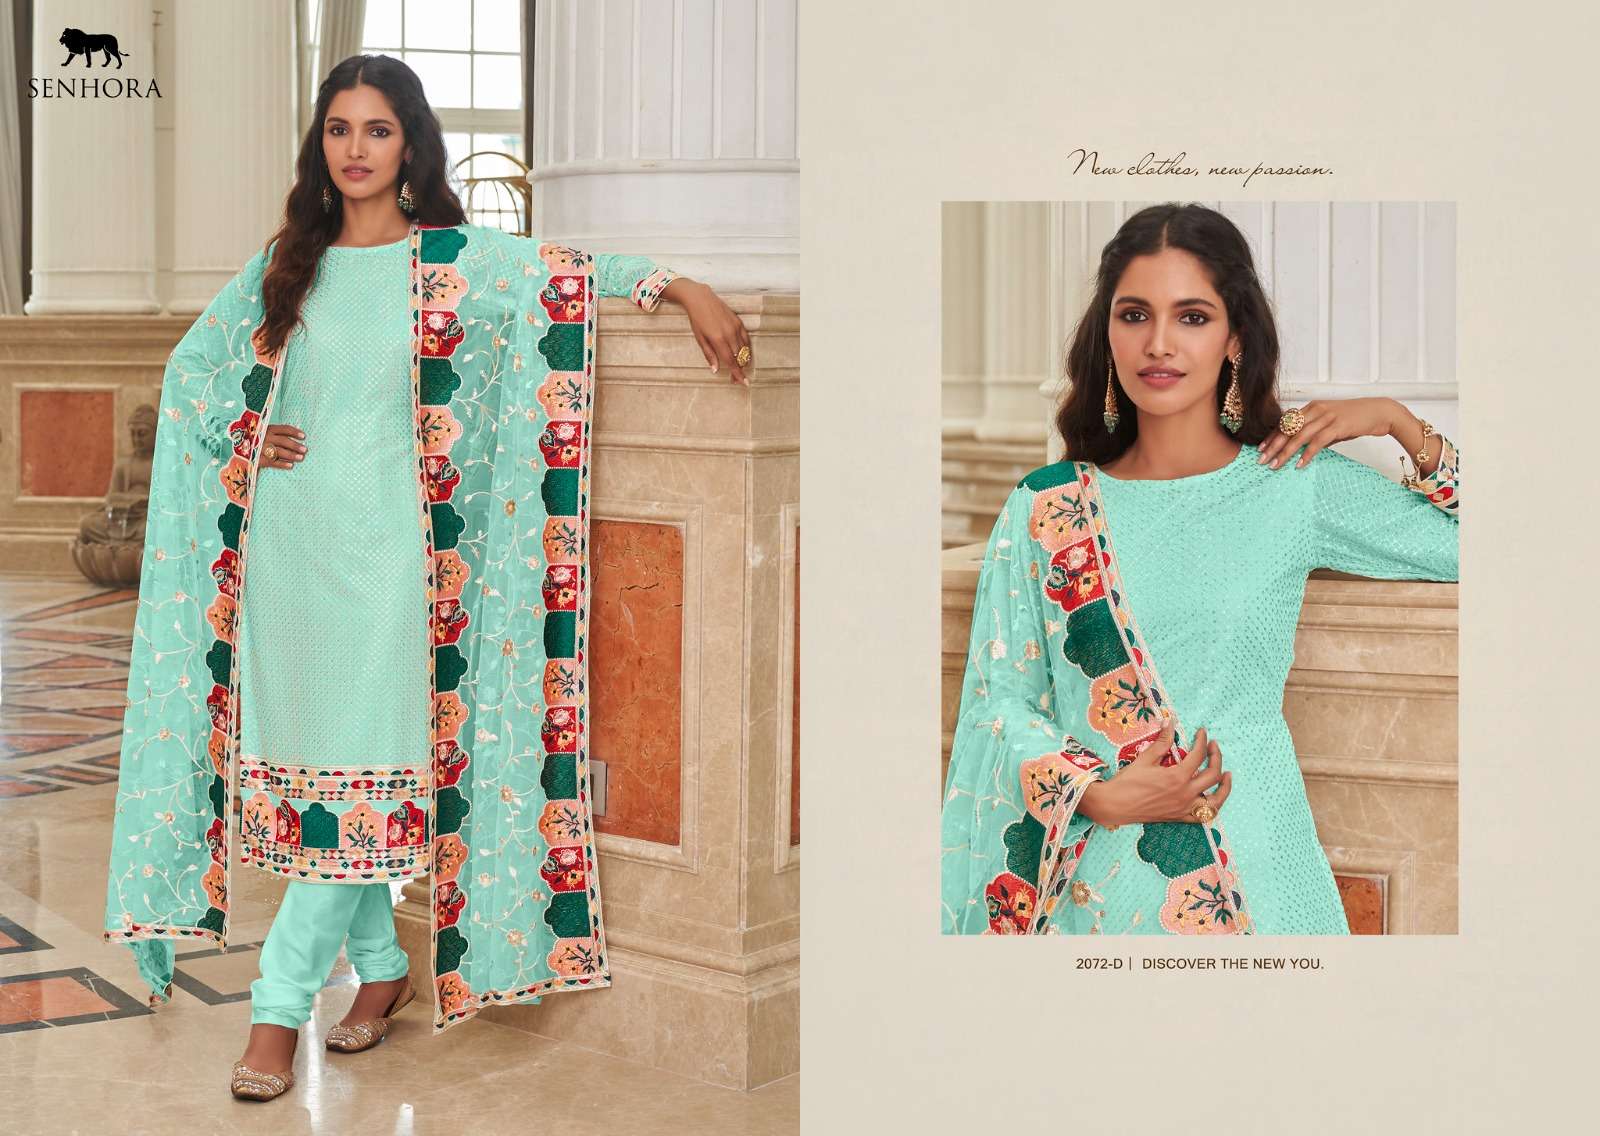 Syeda By Senhora Dresses 2072-A To 2072-D Series Beautiful Stylish Suits Fancy Colorful Casual Wear & Ethnic Wear & Ready To Wear Georgetet Dresses At Wholesale Price